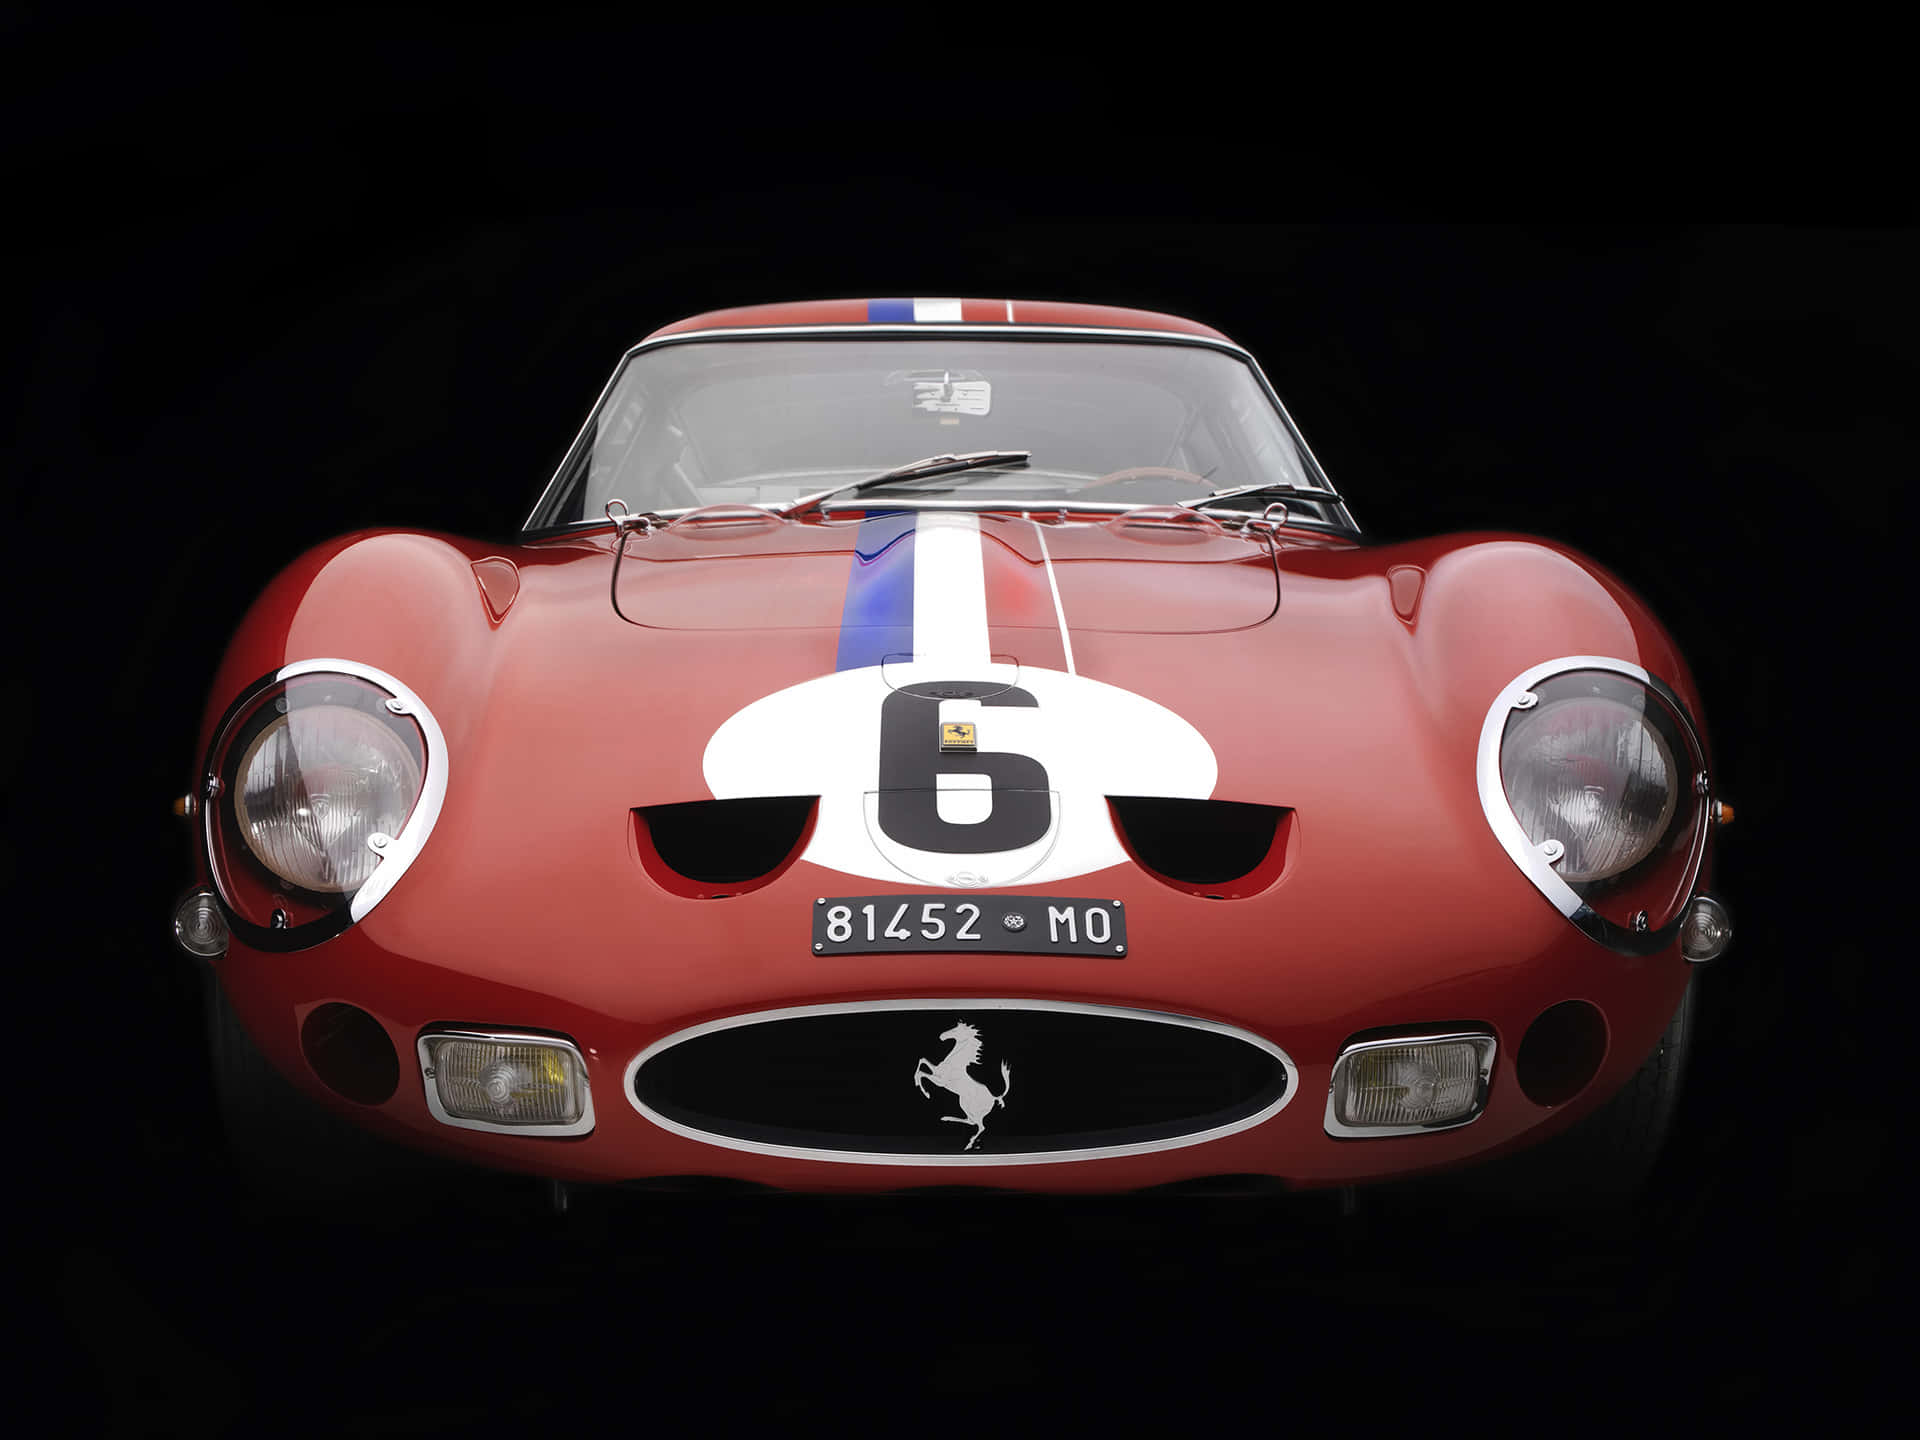 A Red And White Racing Car With The Number '5' On It Wallpaper